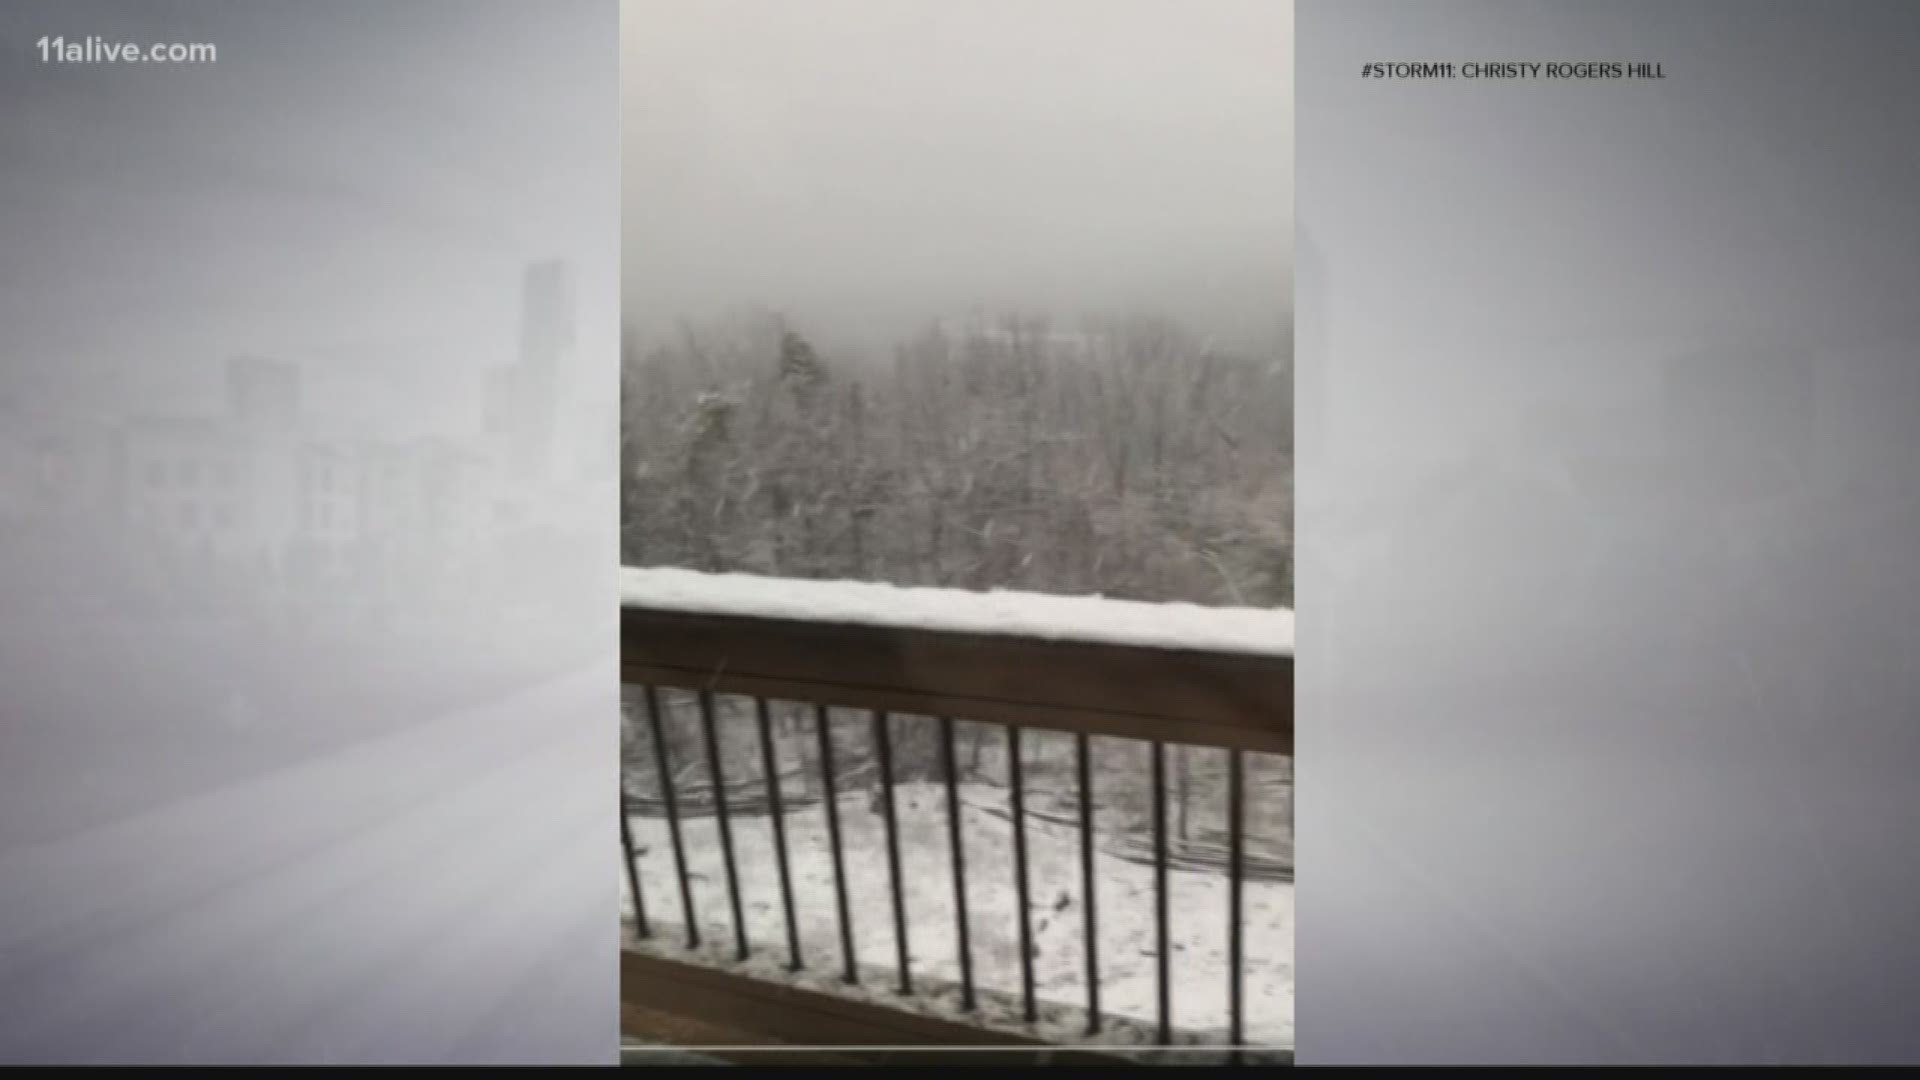 In Clarksville, a StormTracker sent us beautiful video of the snow falling, as well as other StormTrackers in the Facebook group.